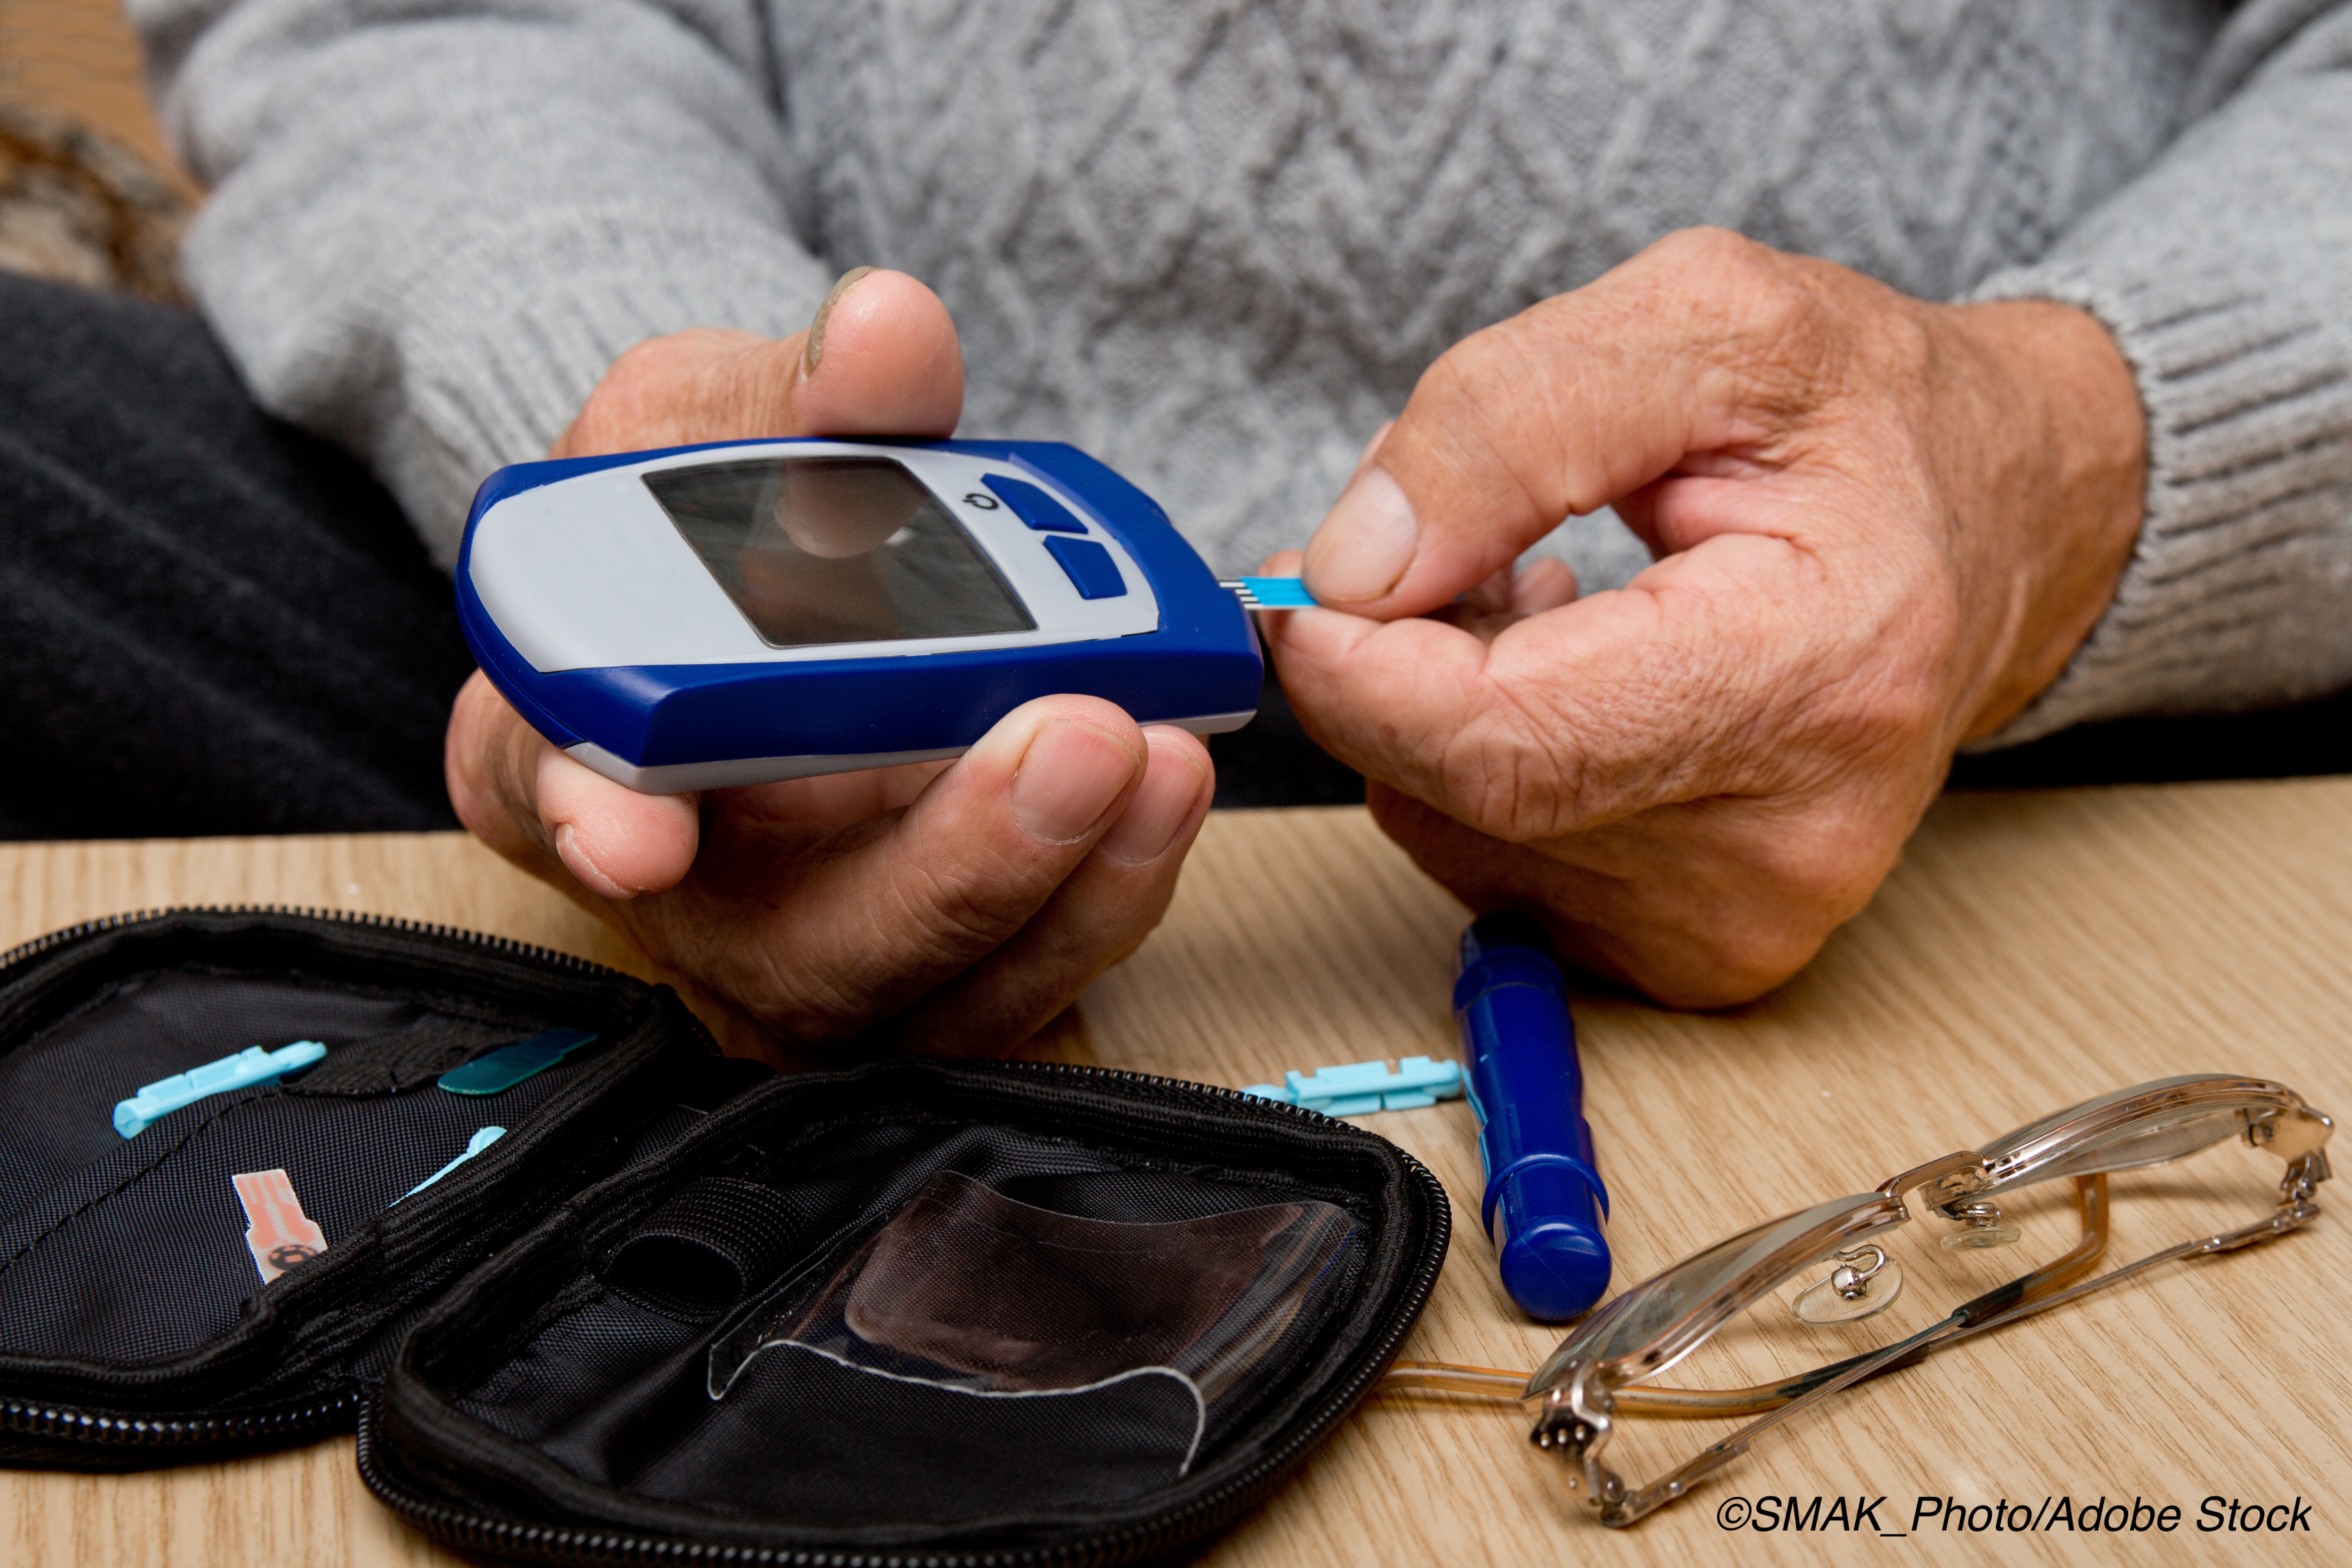 ARIC Analysis Finds Strong Link Between Diabetes Duration and HF